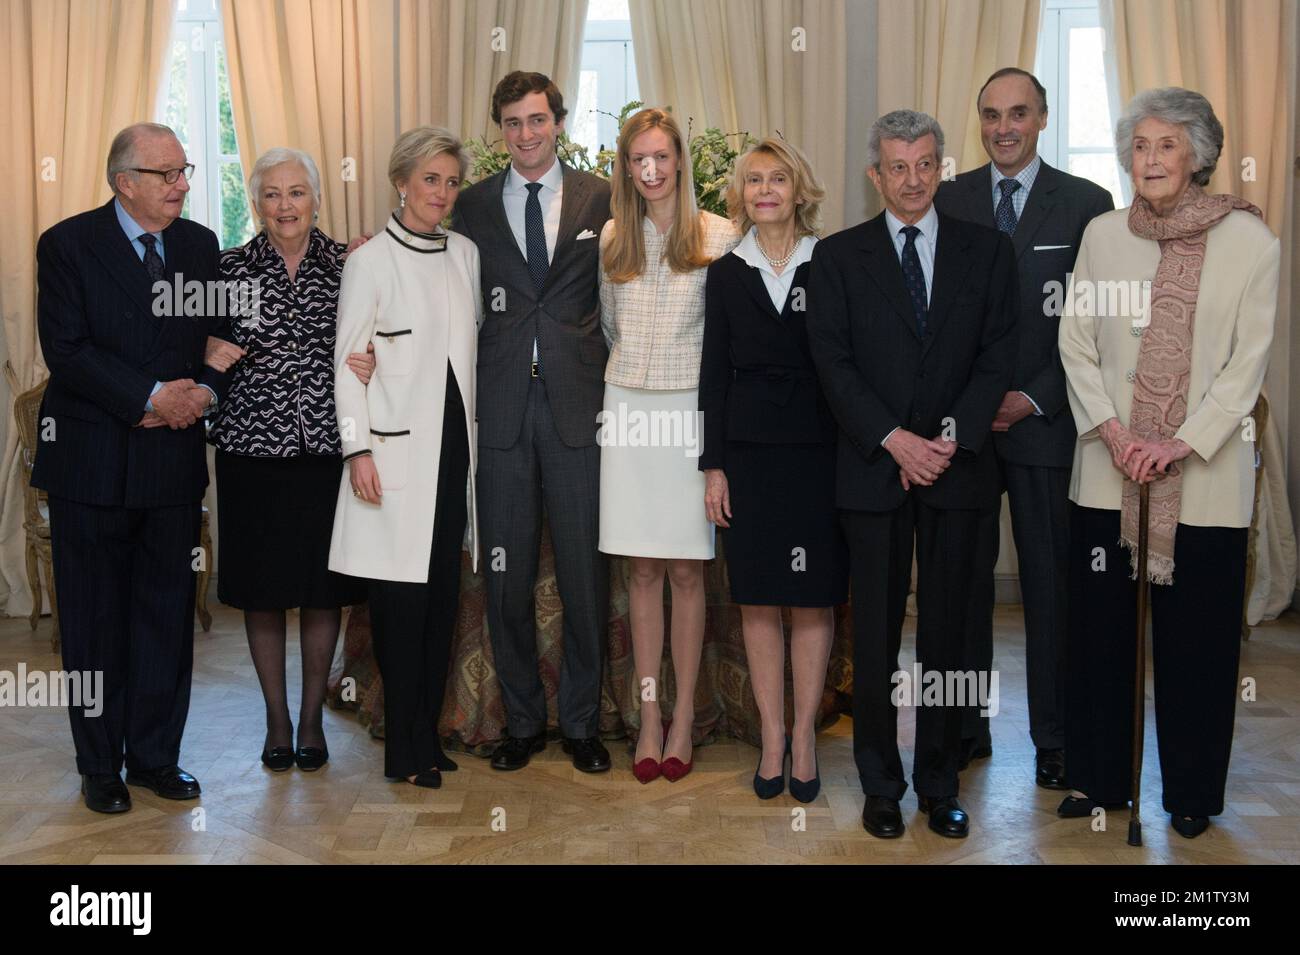 20140215 - BRUSSELS, BELGIUM: L-R, King Albert II of Belgium, Queen Paola of Belgium, Princess Astrid of Belgium, Elisabetta Rosboch von Wolkenstein her mother,, Countess Lilia de Smecchia her father,, Nobile Ettore Rosboch von Wolkenstein and Prince Lorenz of Belgium pictured on the day of the engagement of Belgian Prince Amedeo (grandson of King Albert II) with Elisabetta Rosboch von Wolkenstein, in the Schonenberg residence (the residence of Amedeo's parents), in Brussels, Saturday 15 February 2014. Prince Amedeo, 27 years old and the Italian journalist live in New-York. BELGA PHOTO FREDERI Stock Photo